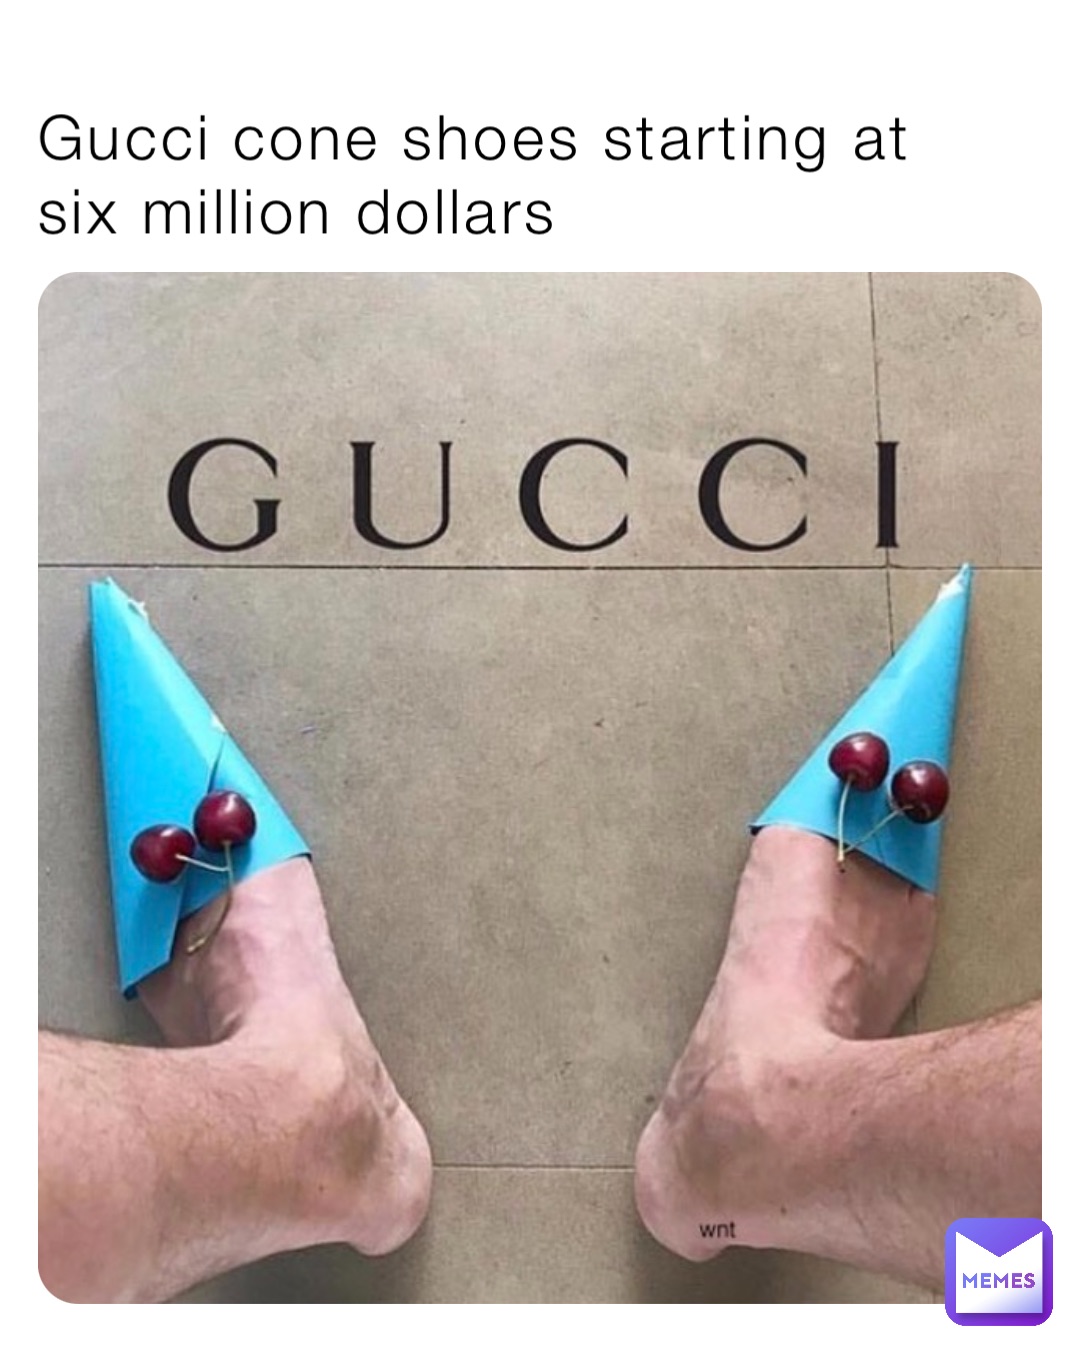 Gucci cone shoes starting at six million dollars